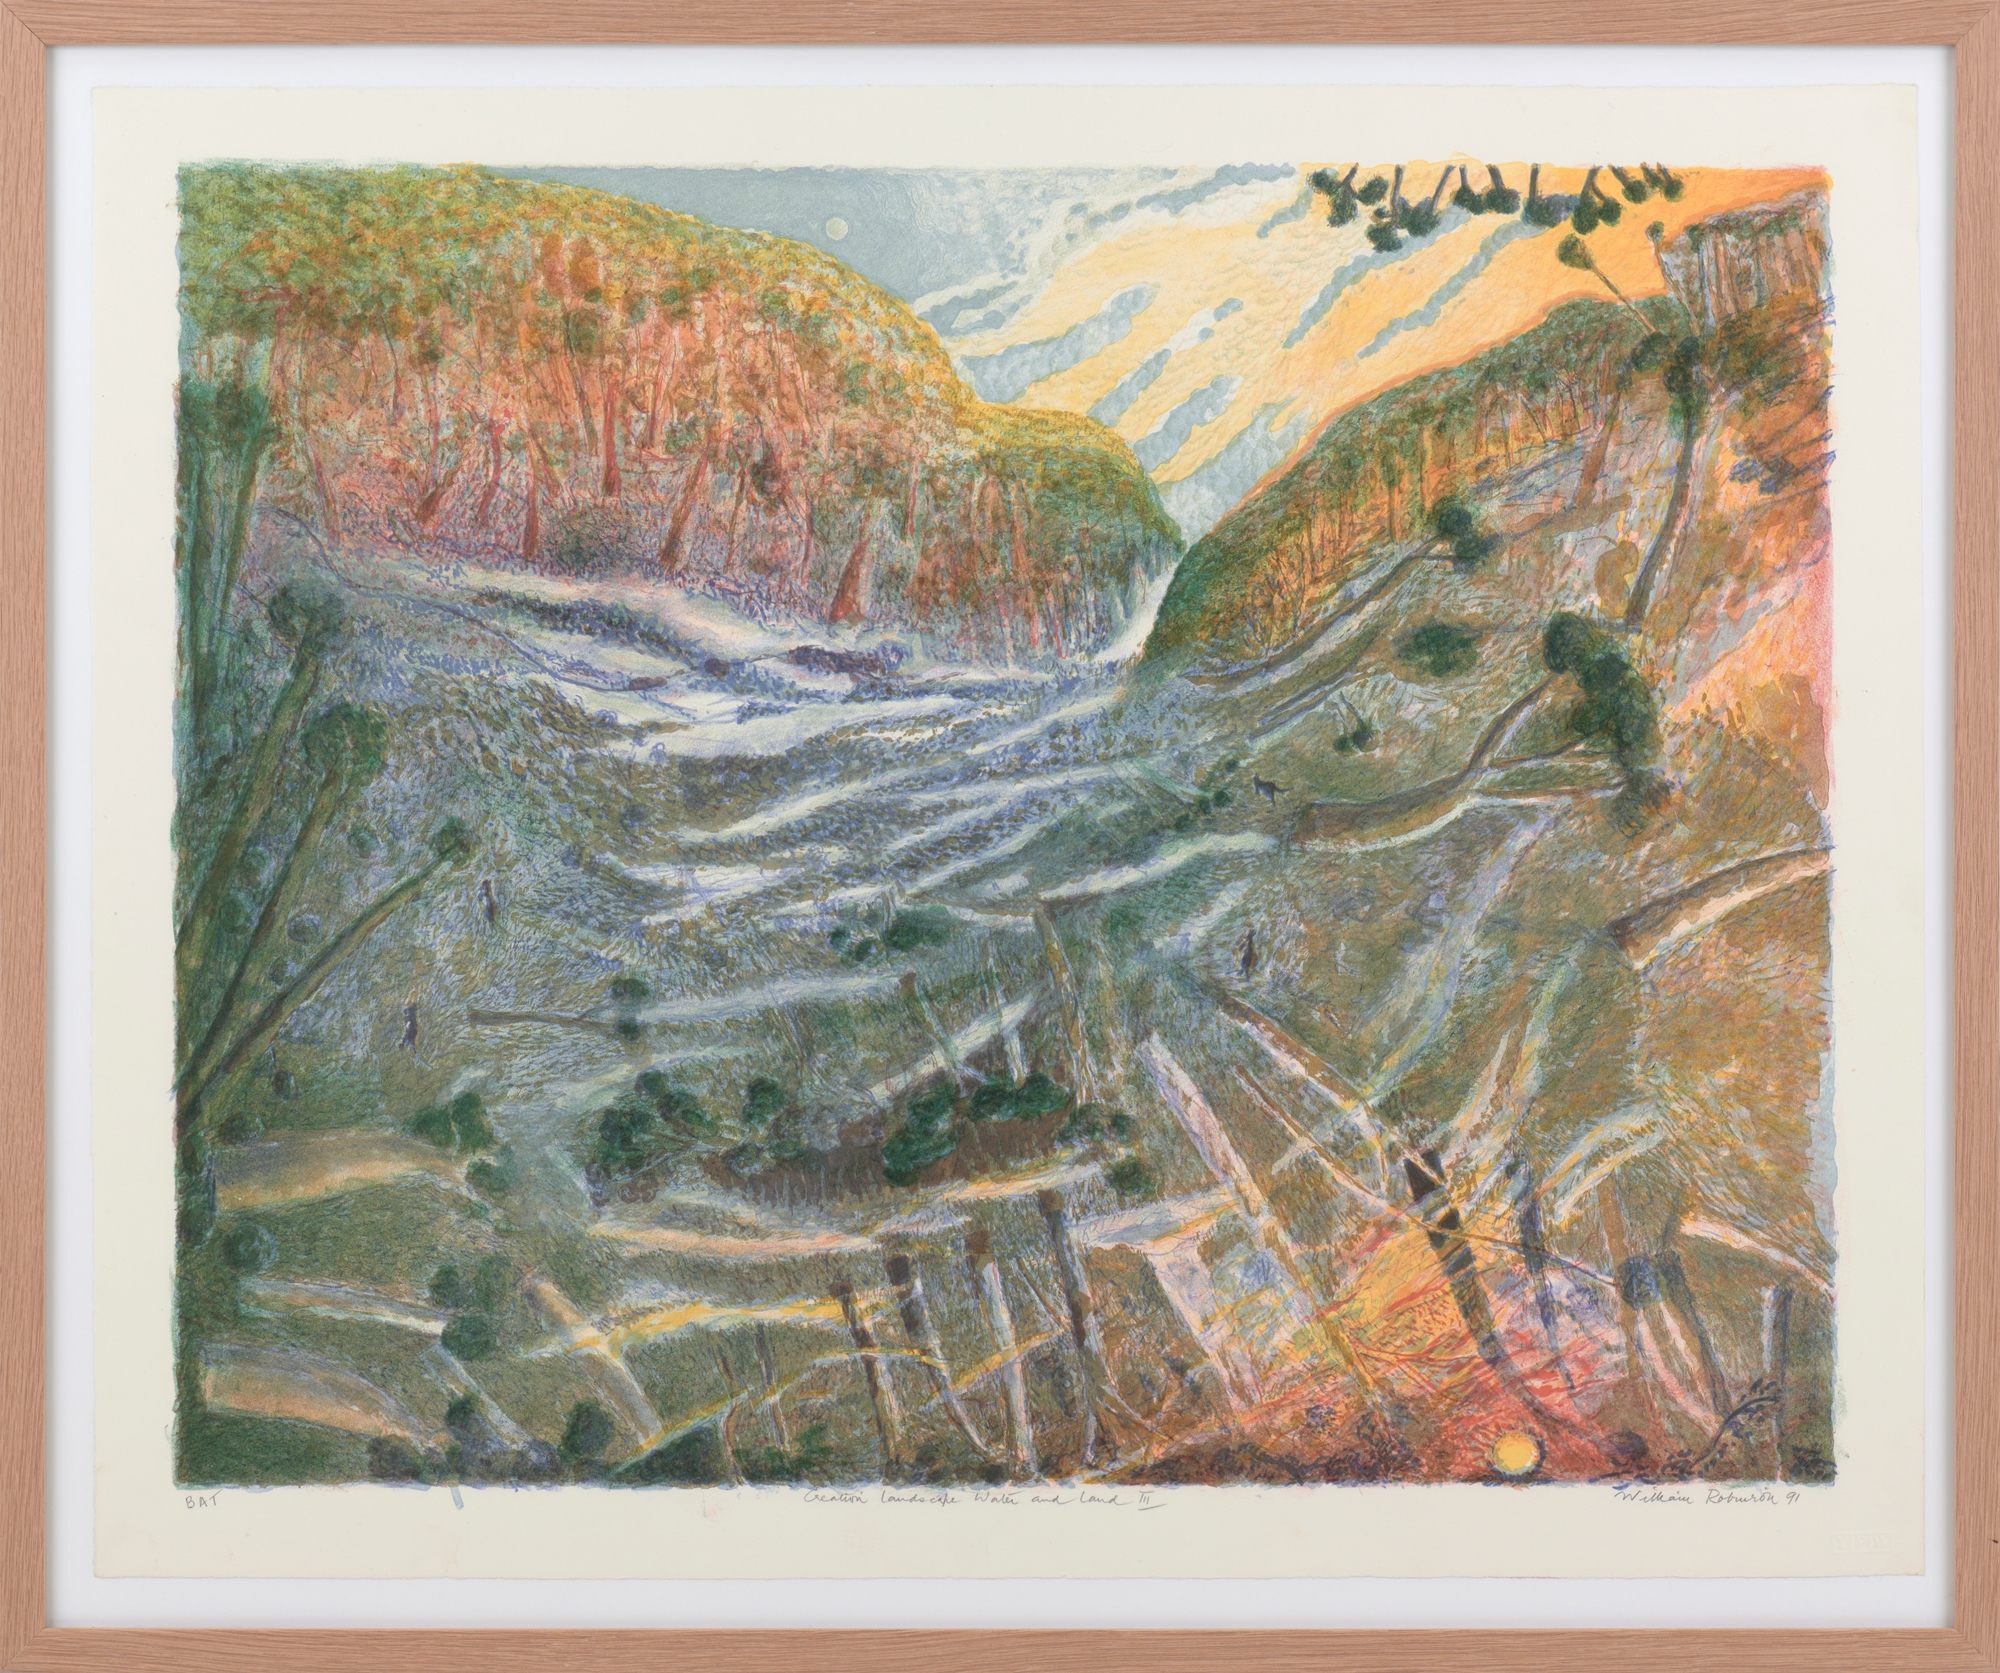 Artwork by William Robinson, Creation Landscape: Water and Land, Made of lithograph